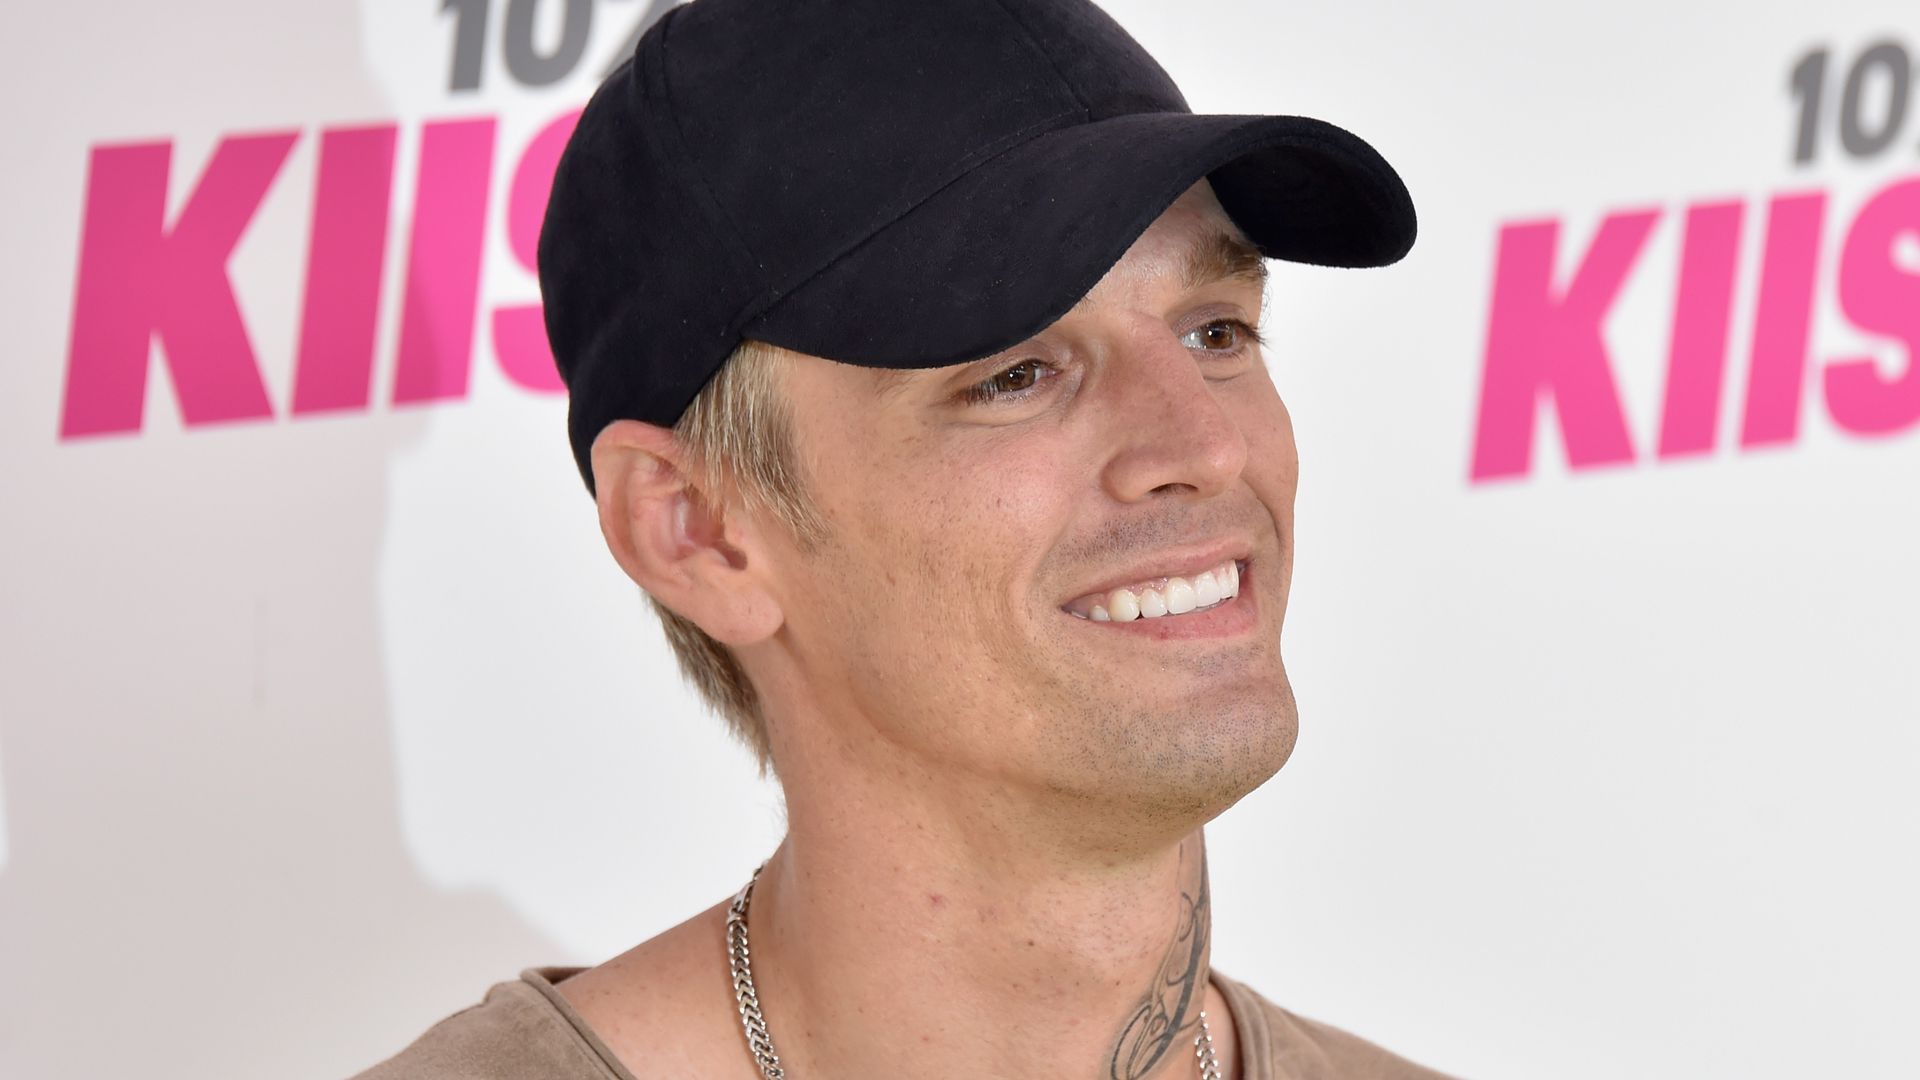 Aaron Carter's cause of death revealed as drowning after taking Xanax and inhaling gas